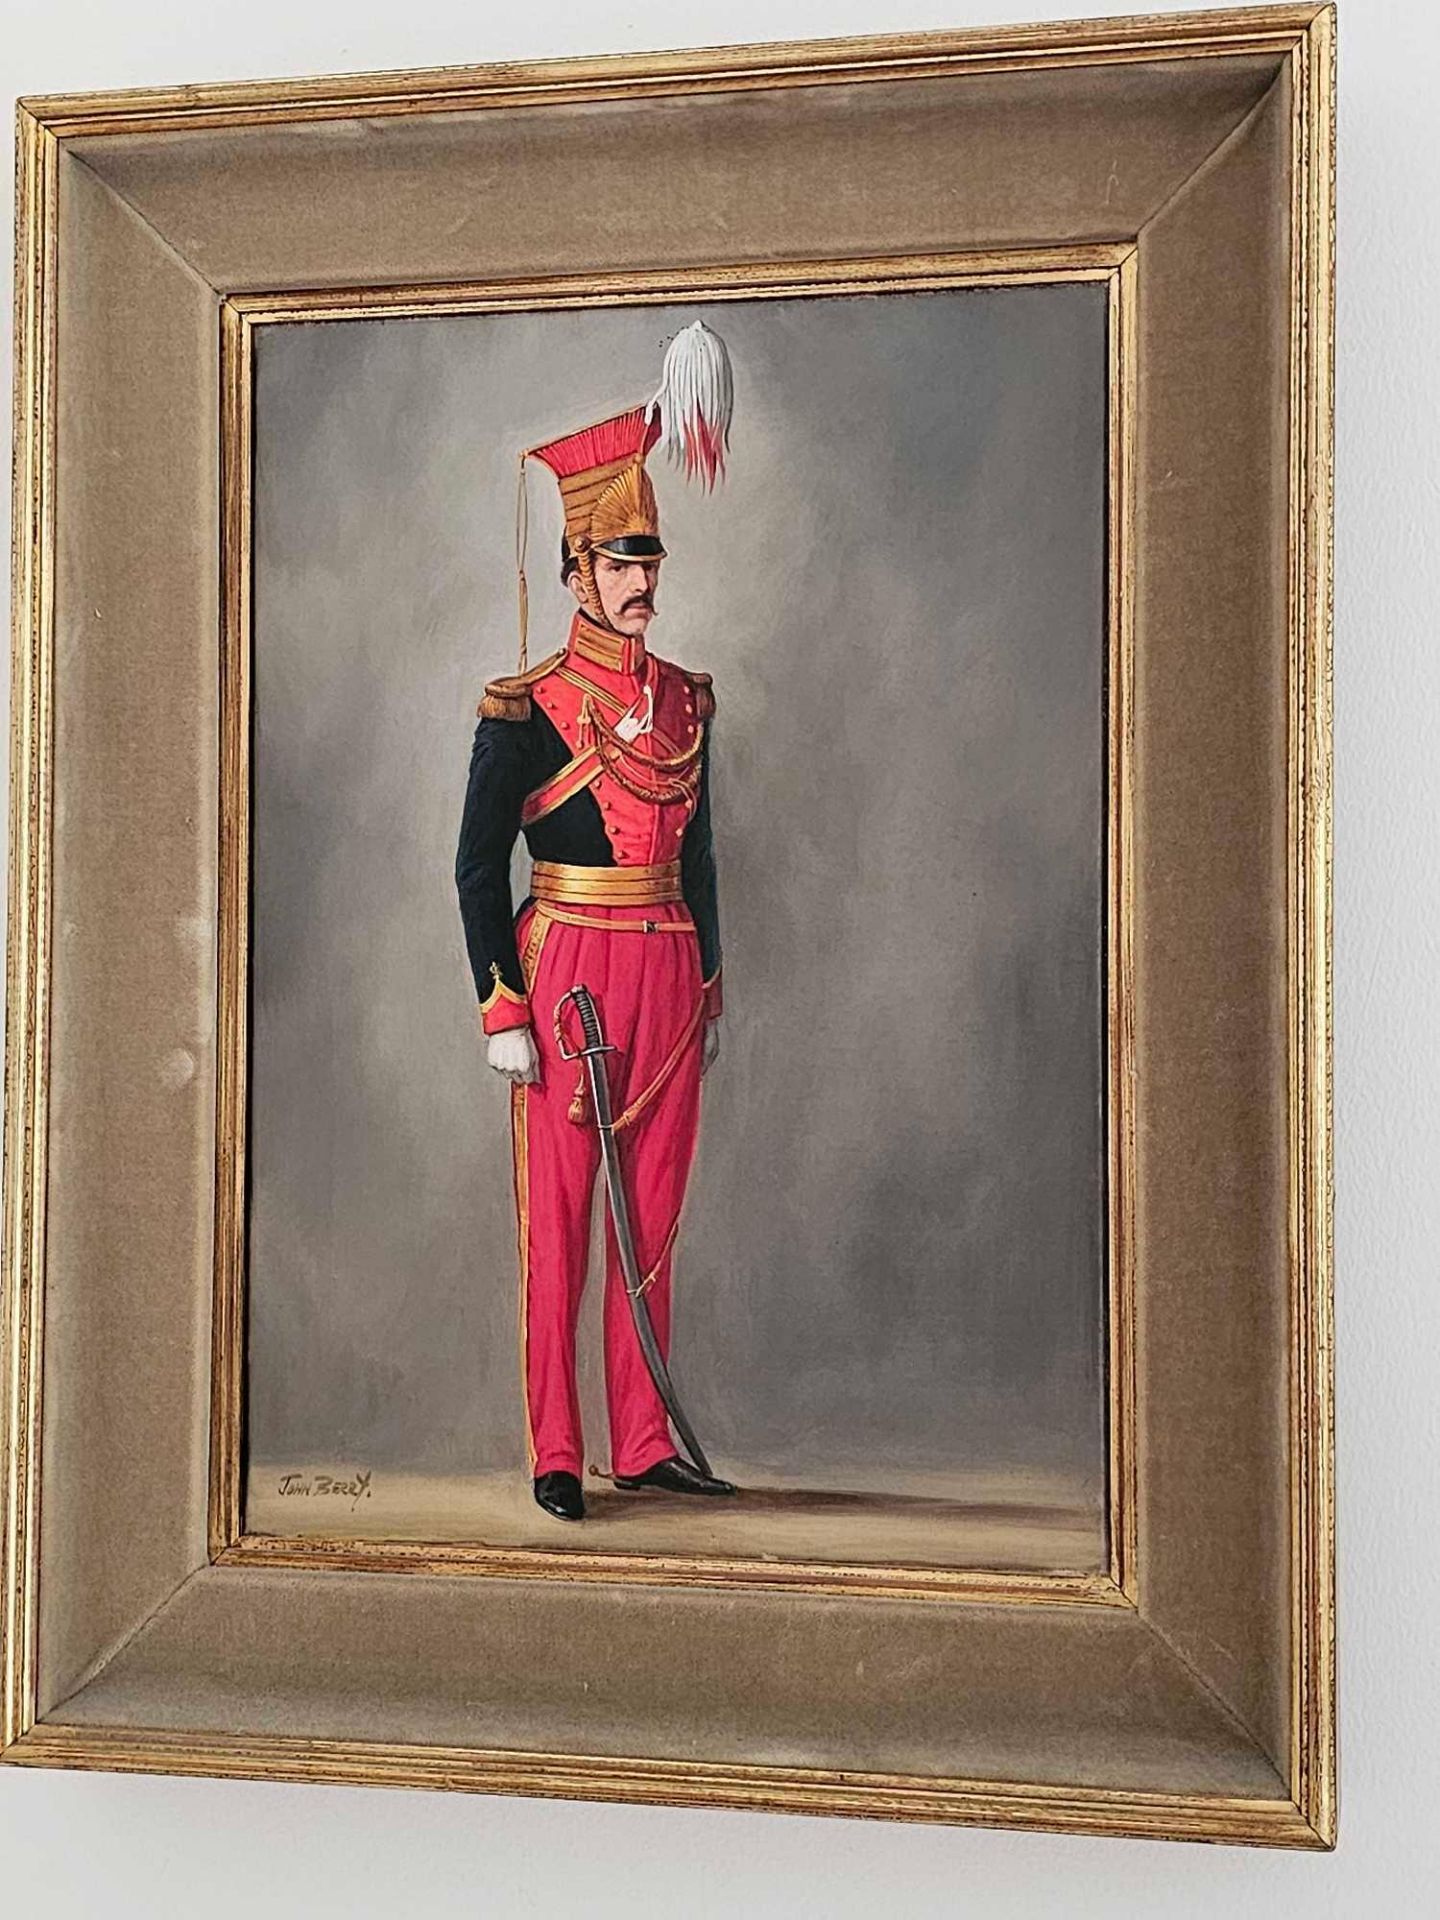 John Berry (1920 - 2009) Oil On Canvas Portrait Of An Officer Of The 12th Lancers 1820 Framed 37 X - Image 2 of 2